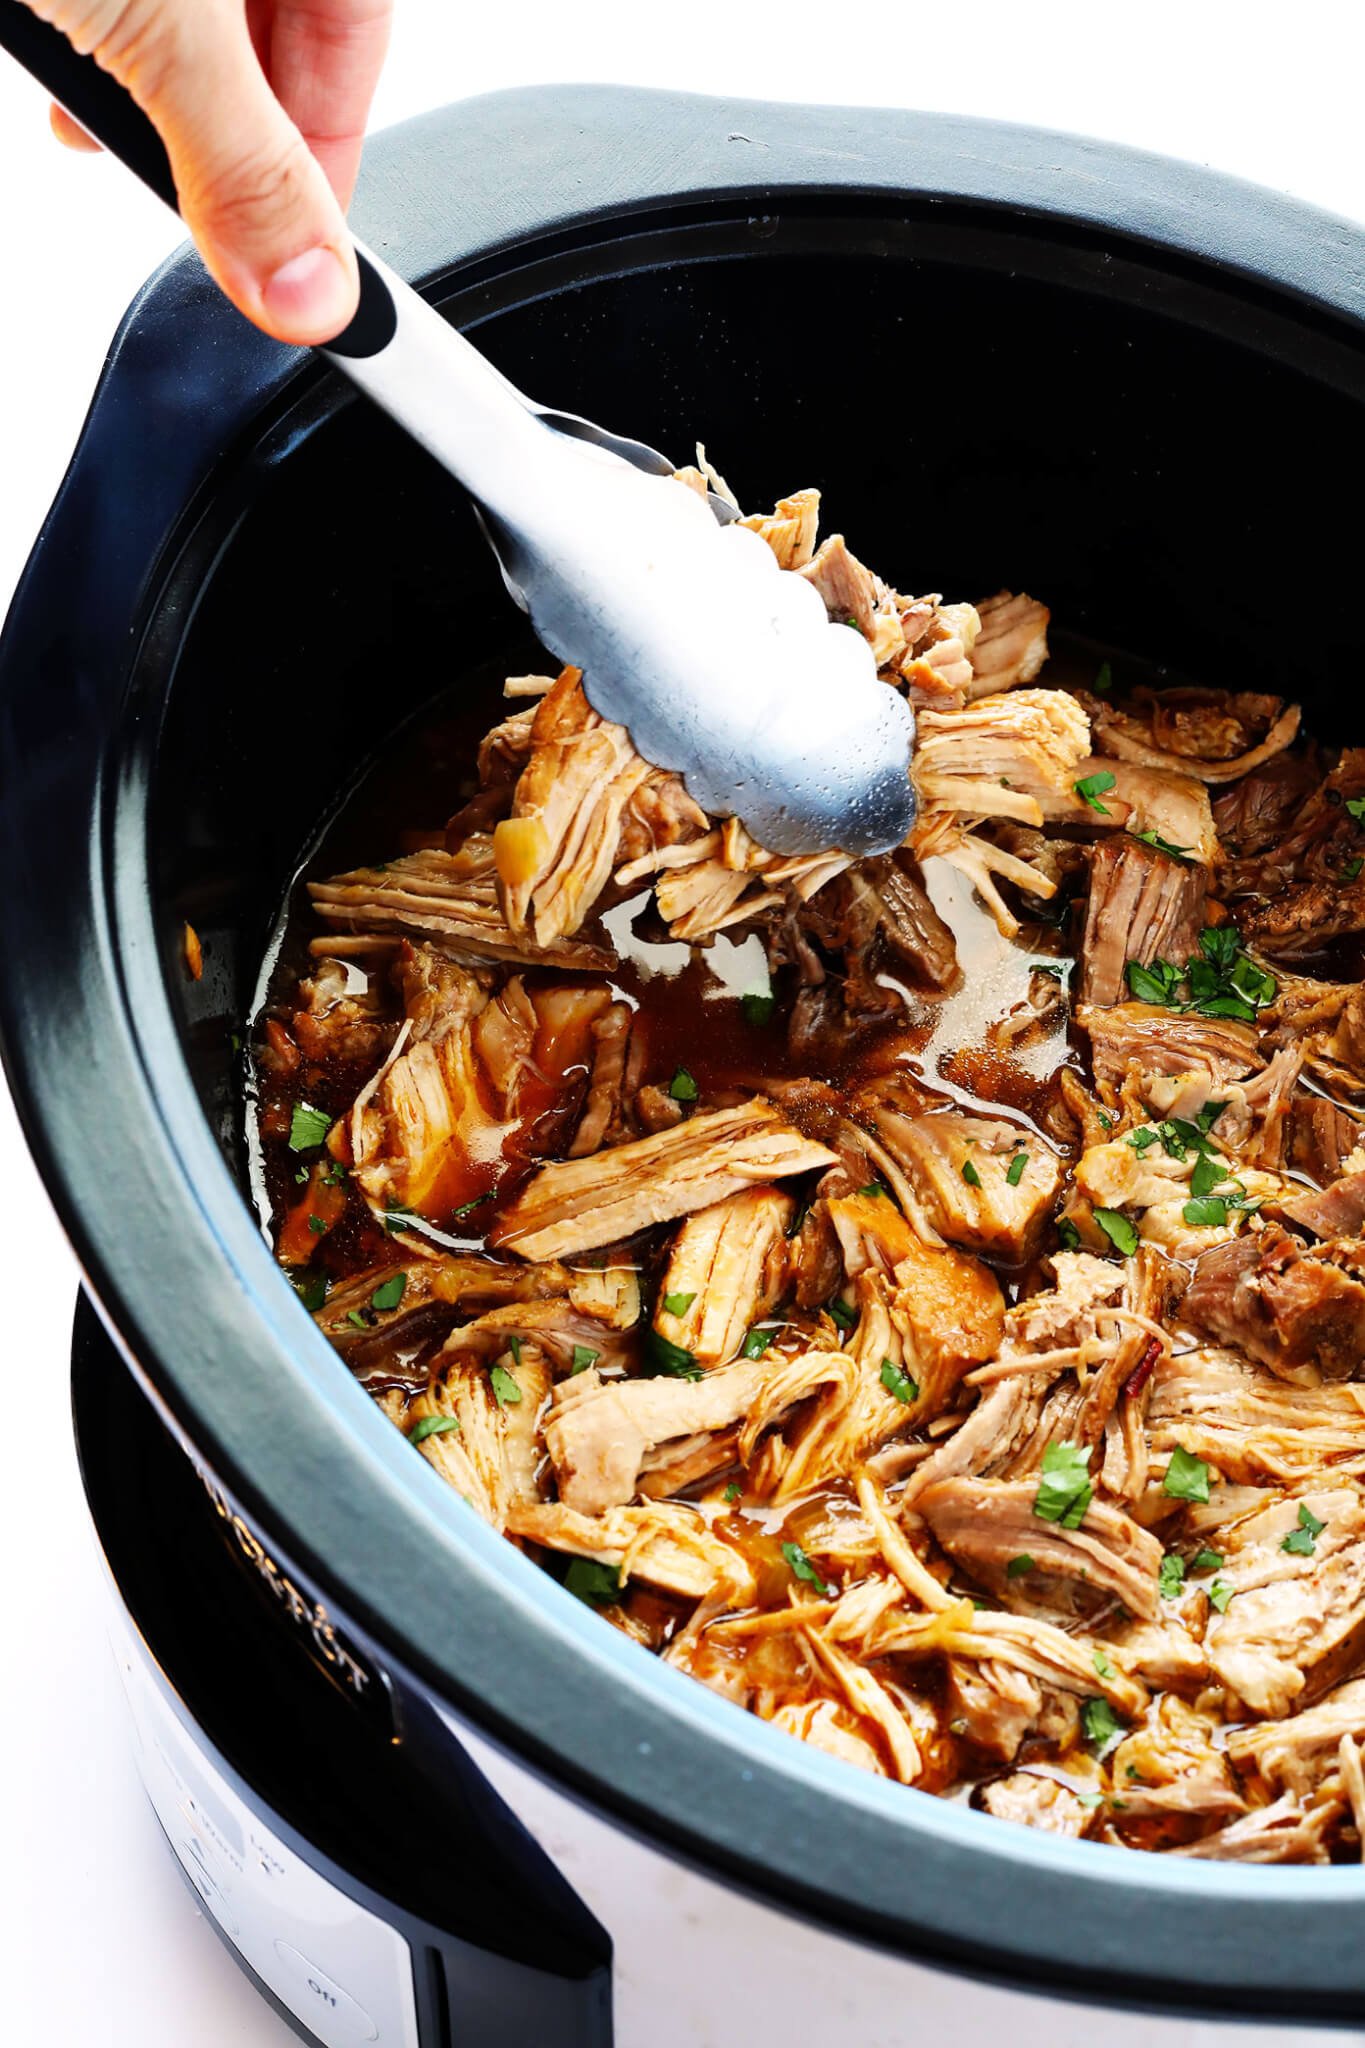 The BEST Slow Cooker Pork Carnitas! They're easy to make in the crock pot, made with my favorite Mexican seasonings, and so crispy and delicious! Perfect for tacos, enchiladas, salads, burritos, quesadillas and more. | gimmesomeoven.com